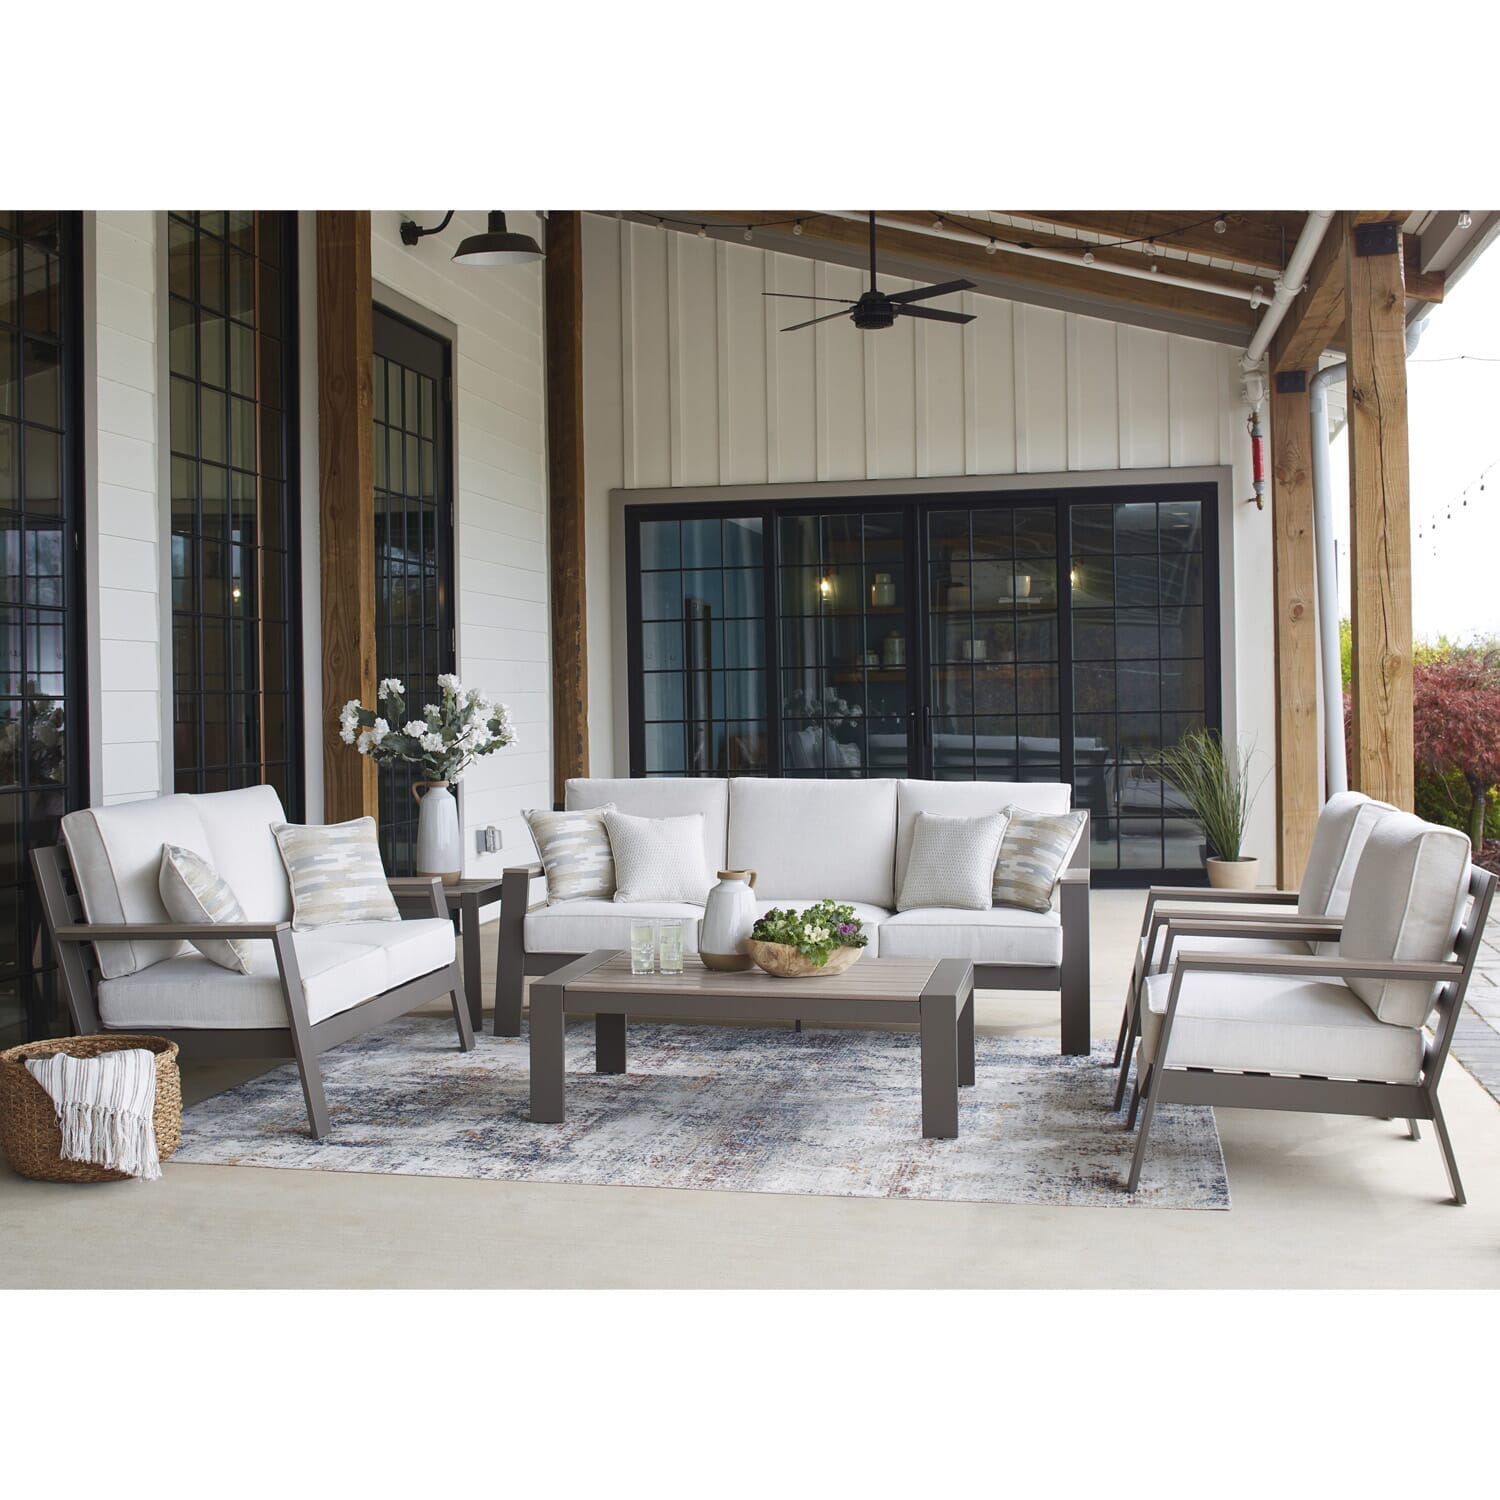 Sunny 5-pc. outdoor seating collection with metal frame and natural cushions